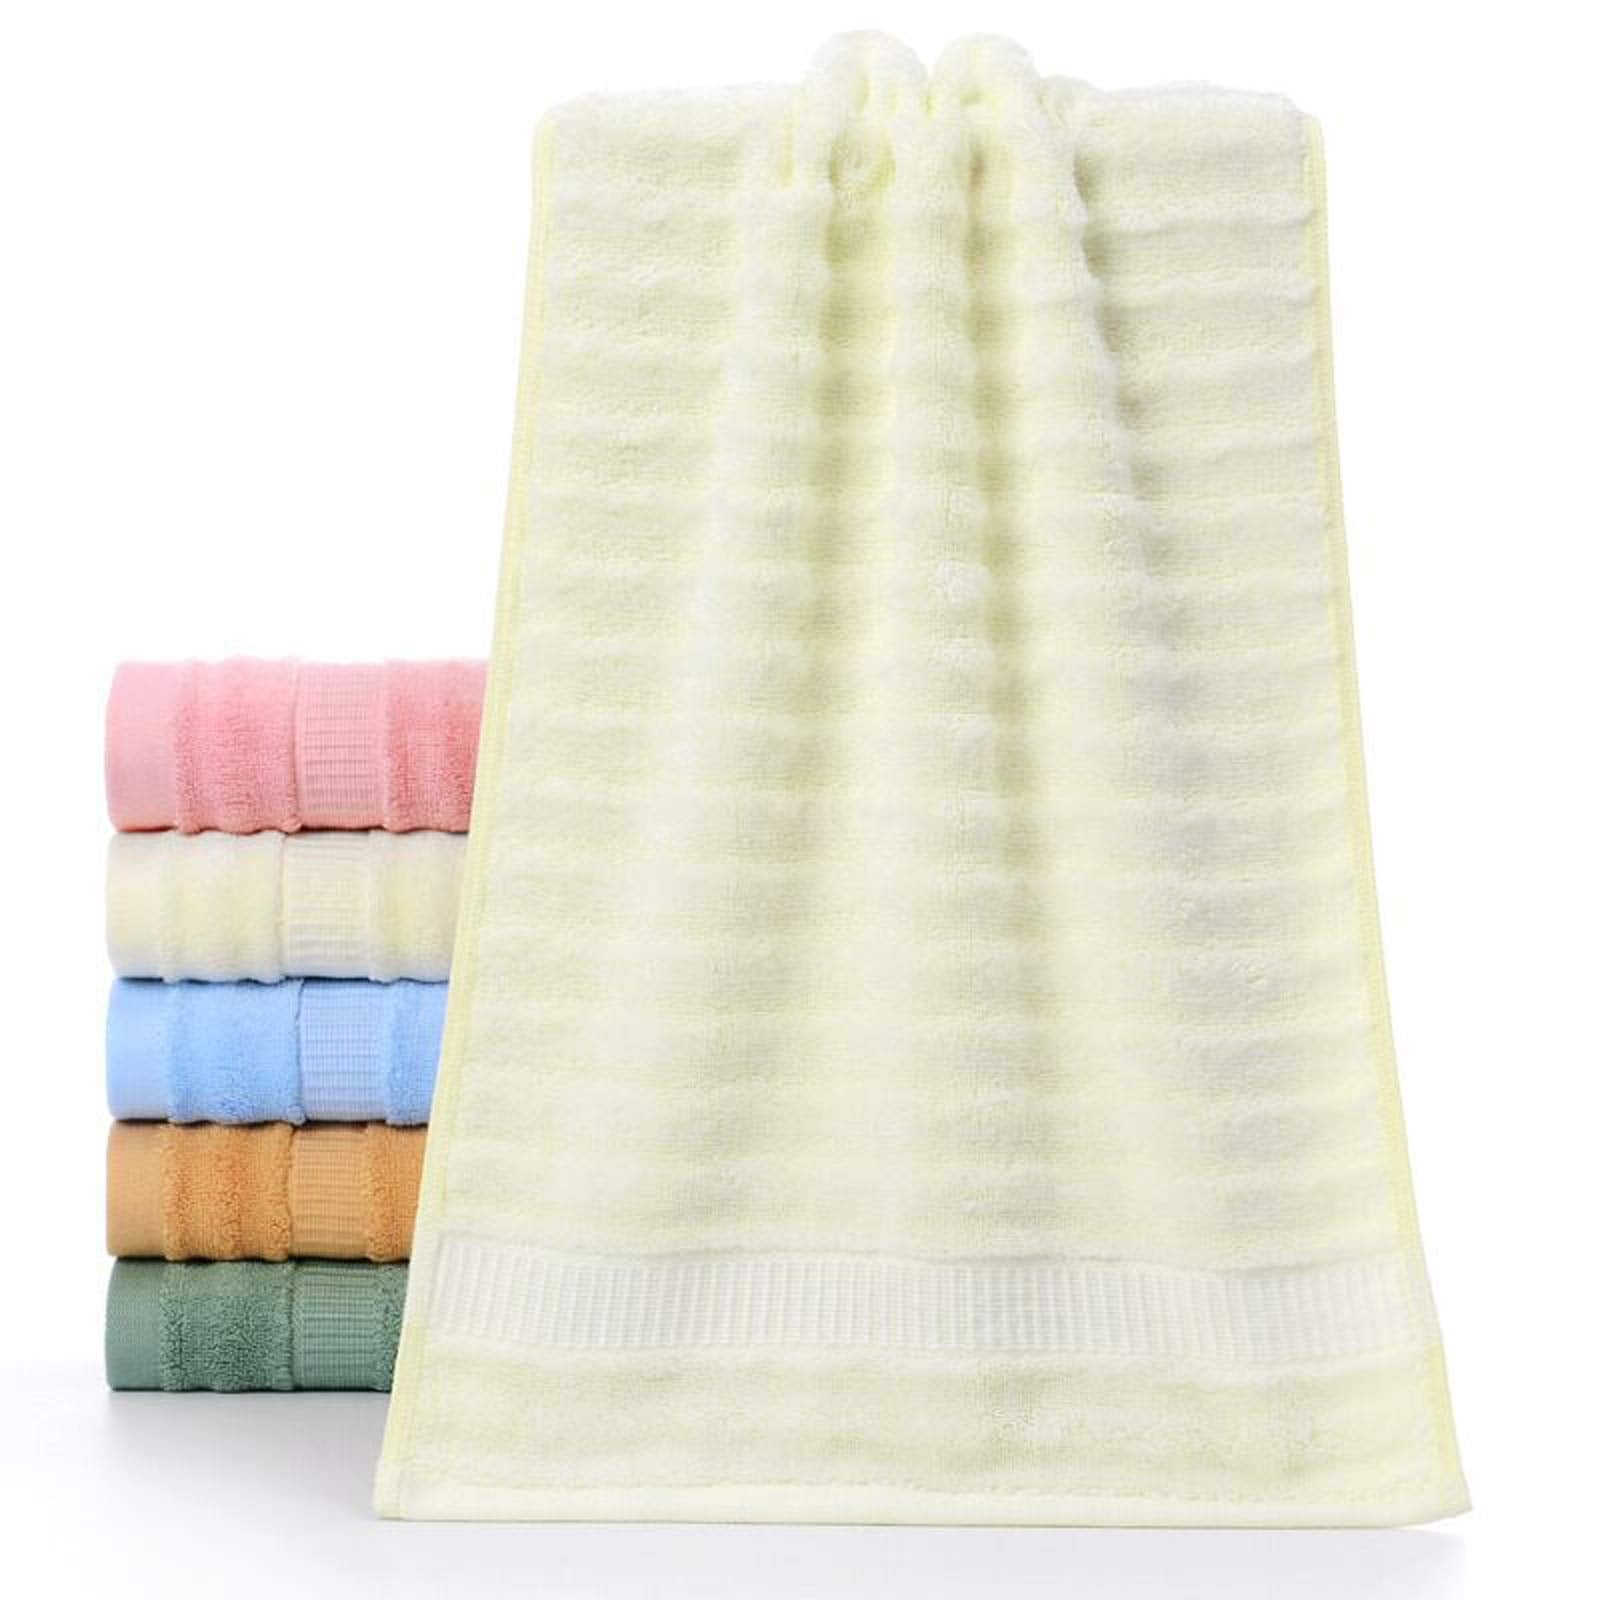 Mush Ultra Soft & Super Absorbent | 600 GSM Bamboo Bath Towel Set of 2 | 29 X 59 Inches (Cream & Green) Pack of 2